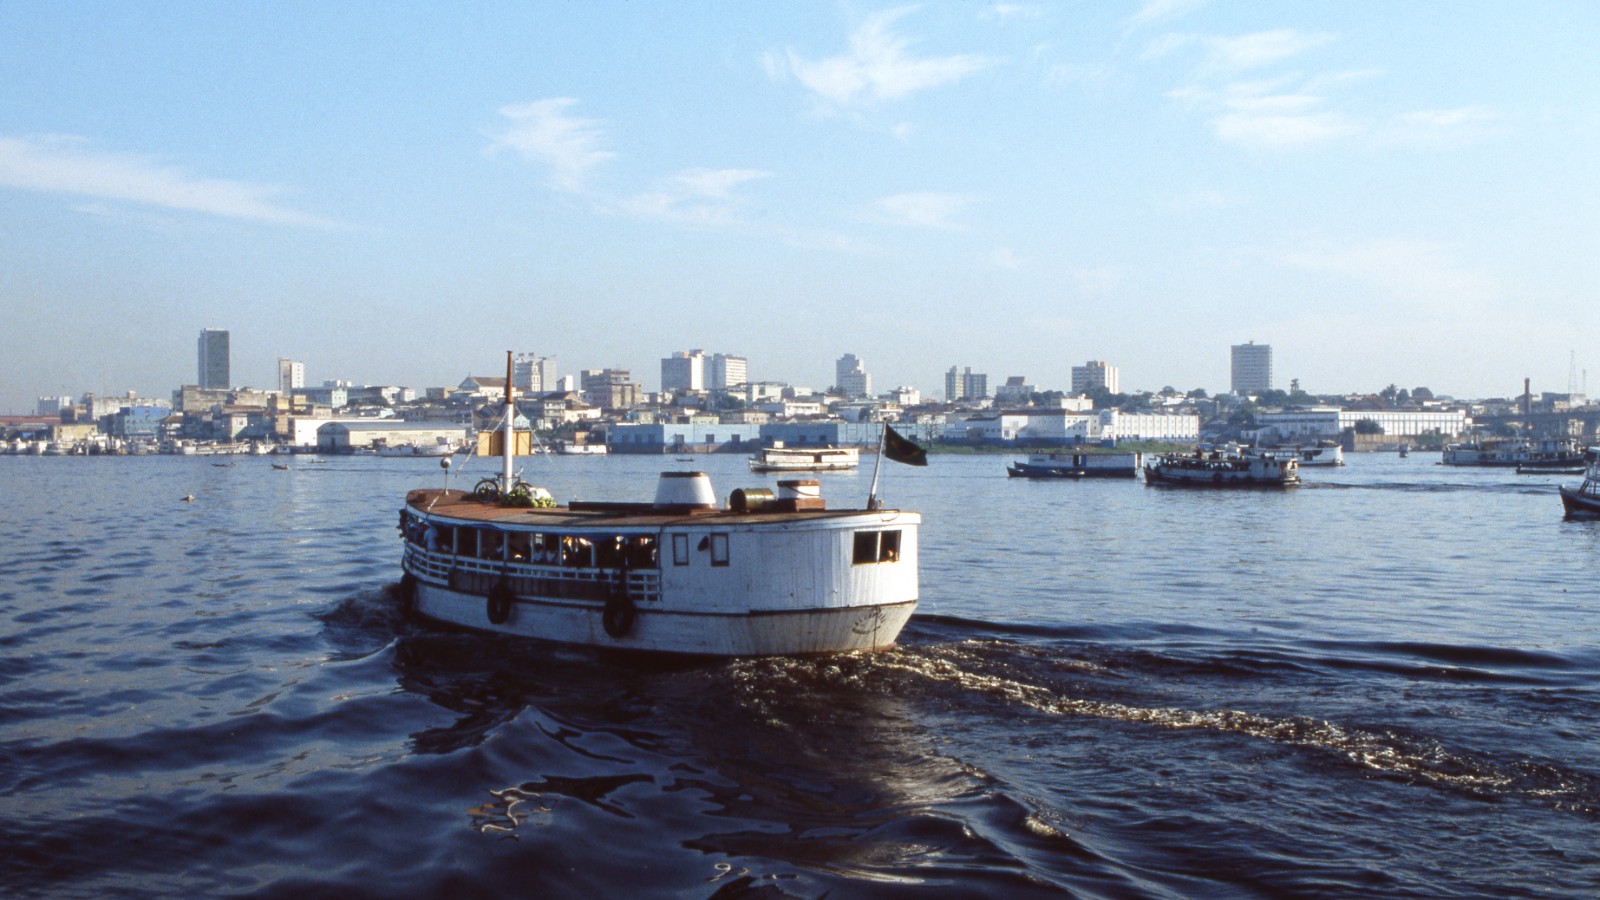 In this image you can see a white ferry full of tourists as it sails across the Amazon River.  In the background you can see the skyline of Manaus, Brazil.